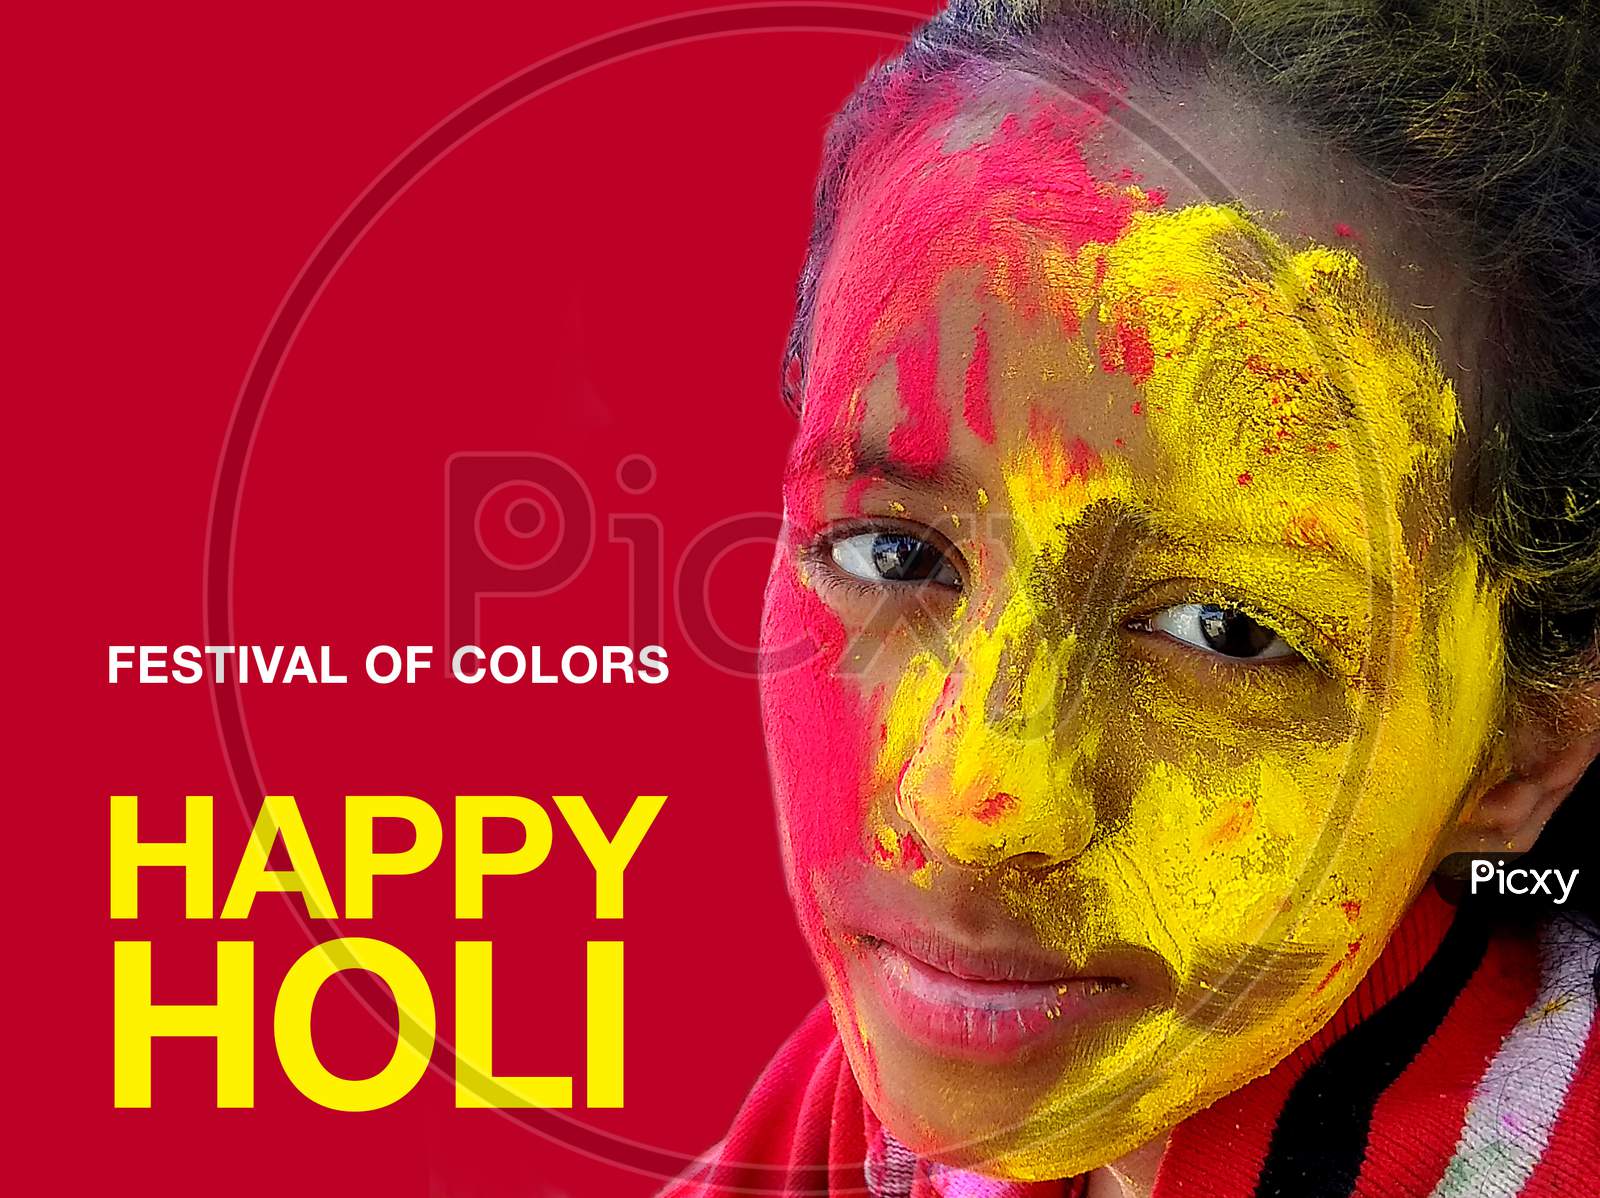 Indian Hindu festival of colors, in Hindi Language Translation on the Poster (Called Holi)greeting with colorful yellow, red powder banner, poster, creative, flyer, Child Playing Holi Festival